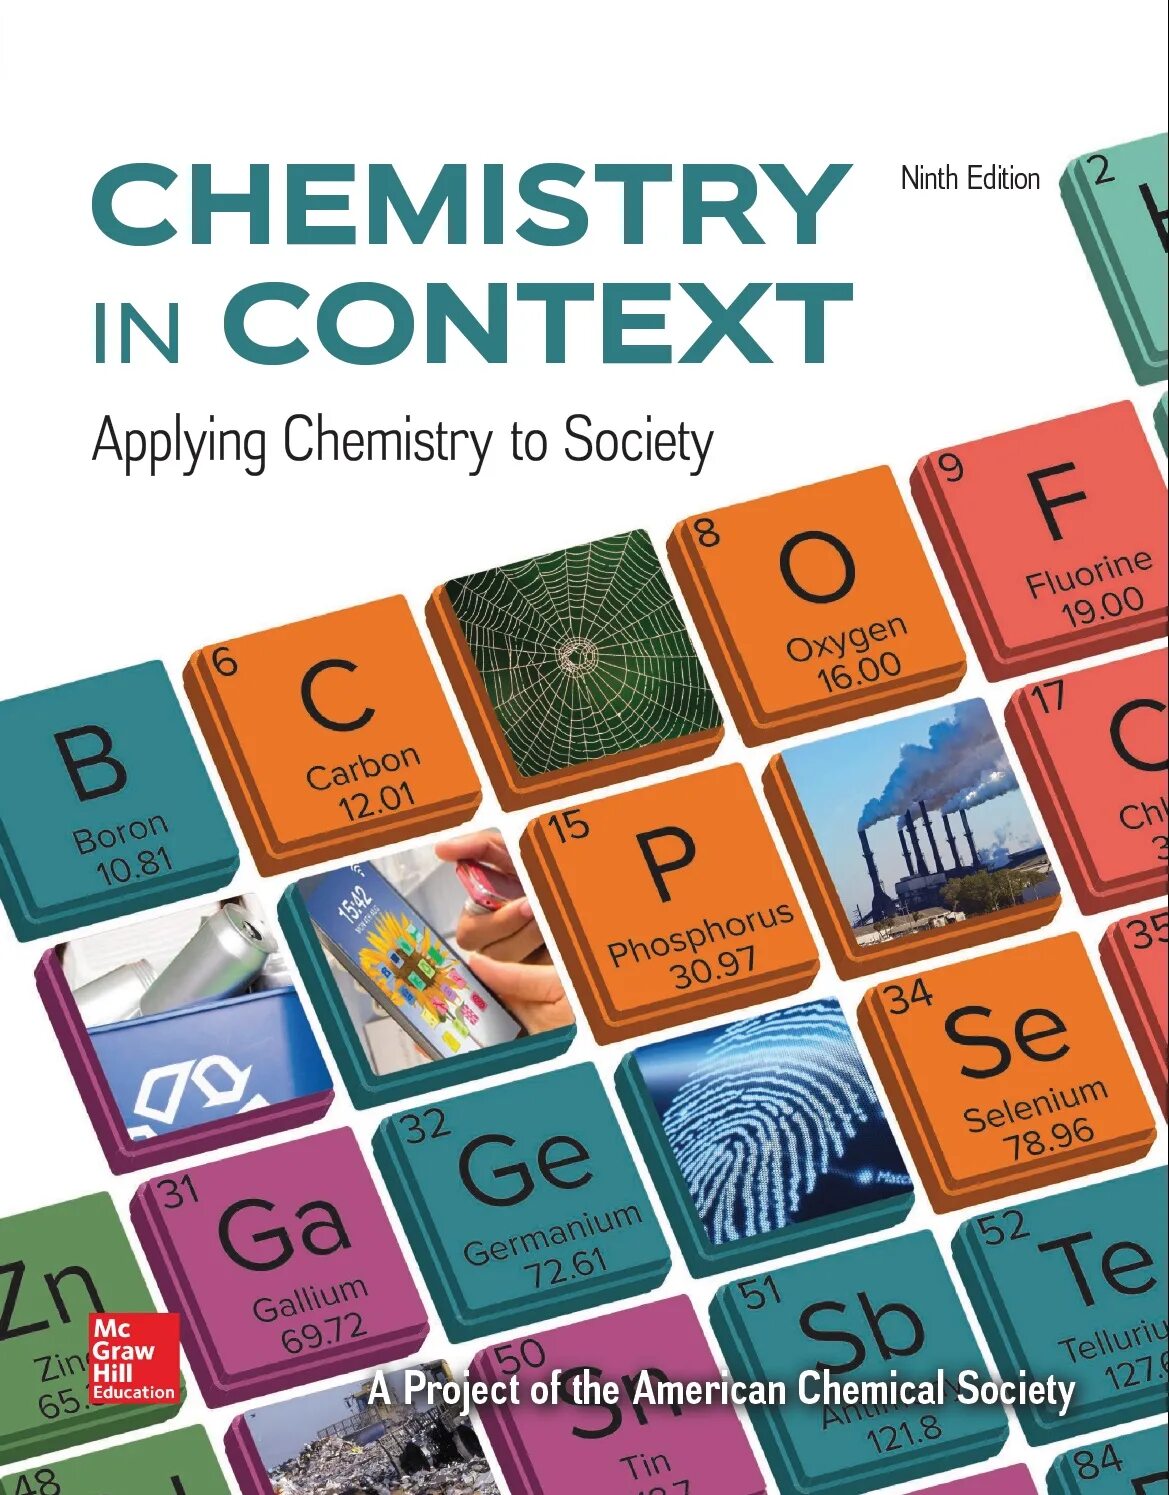 Chemical society. In химия. Chemistry in context author. Chemistry in context 10th Edition. Chemistry textbook.